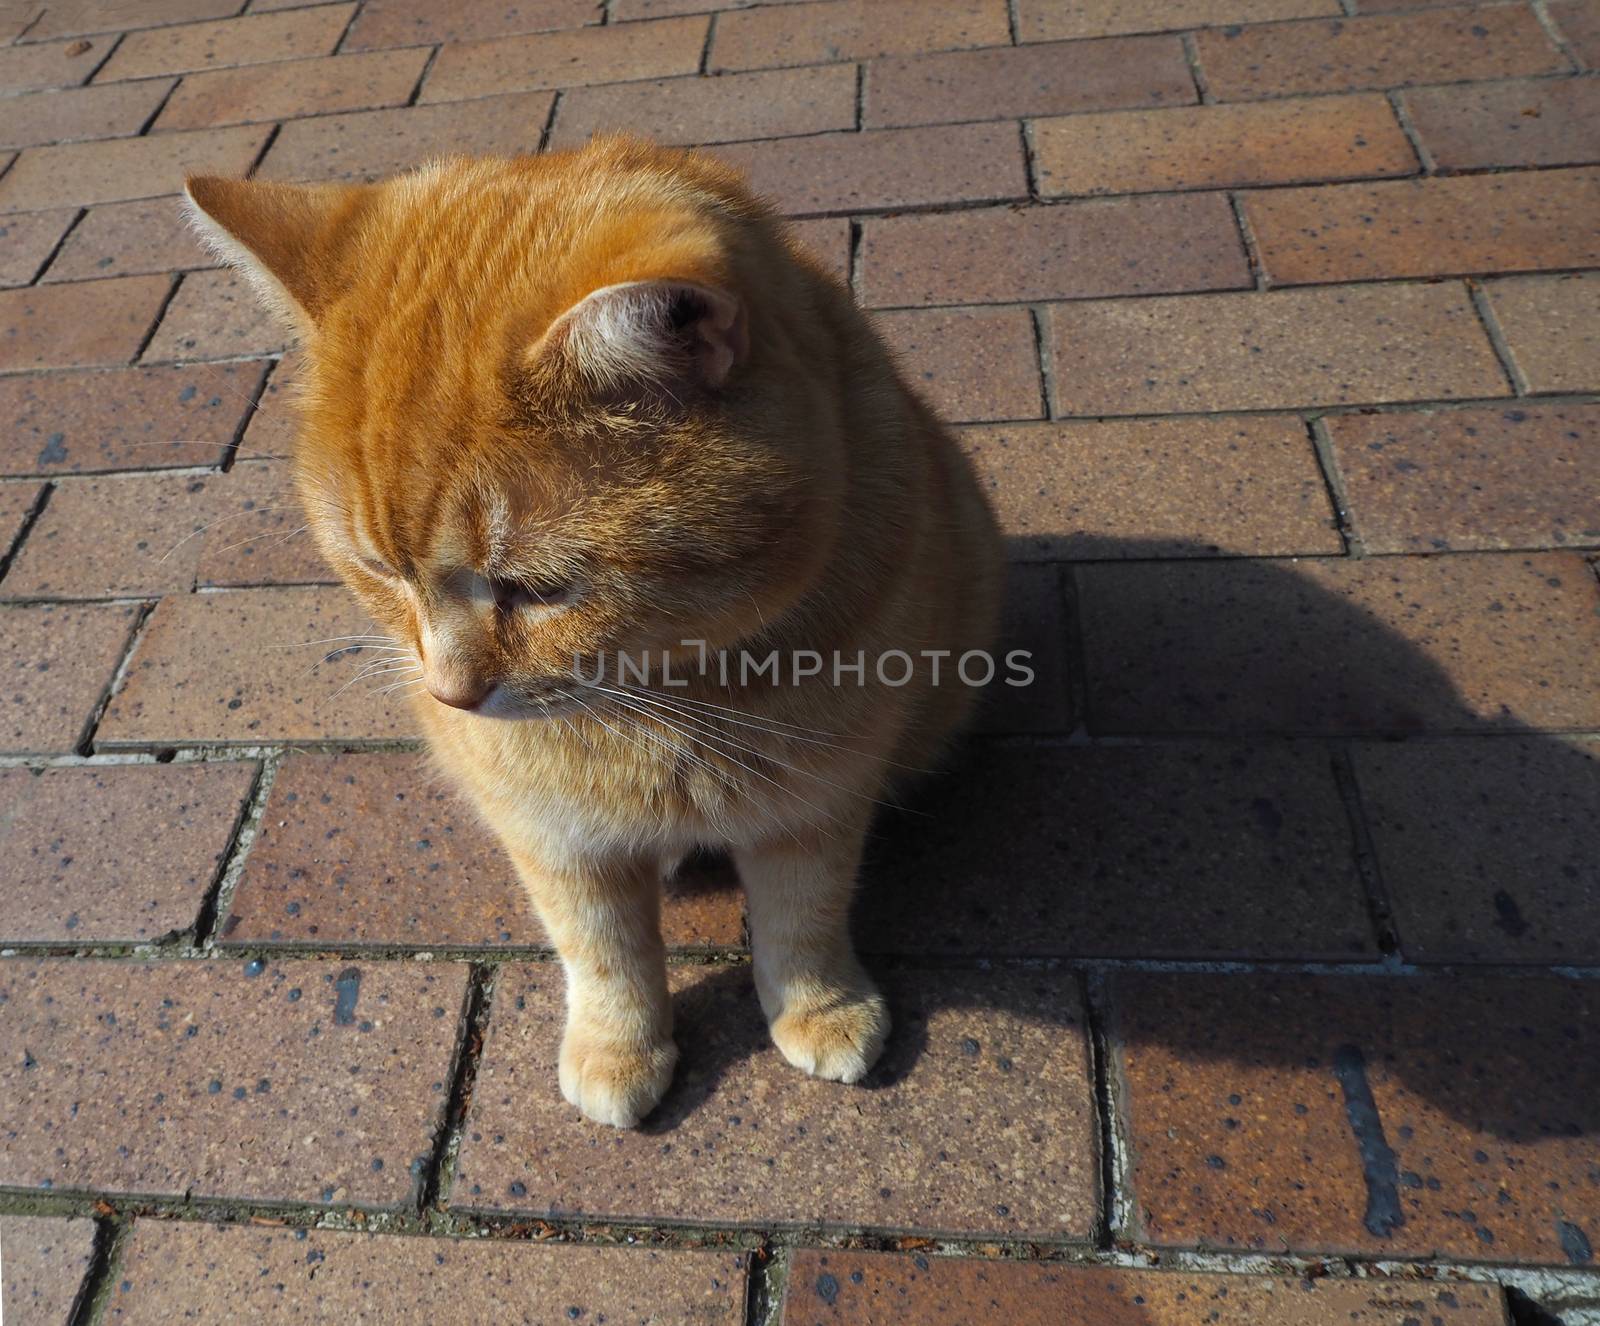 close up ginger rehead cat on the brick paving floor 